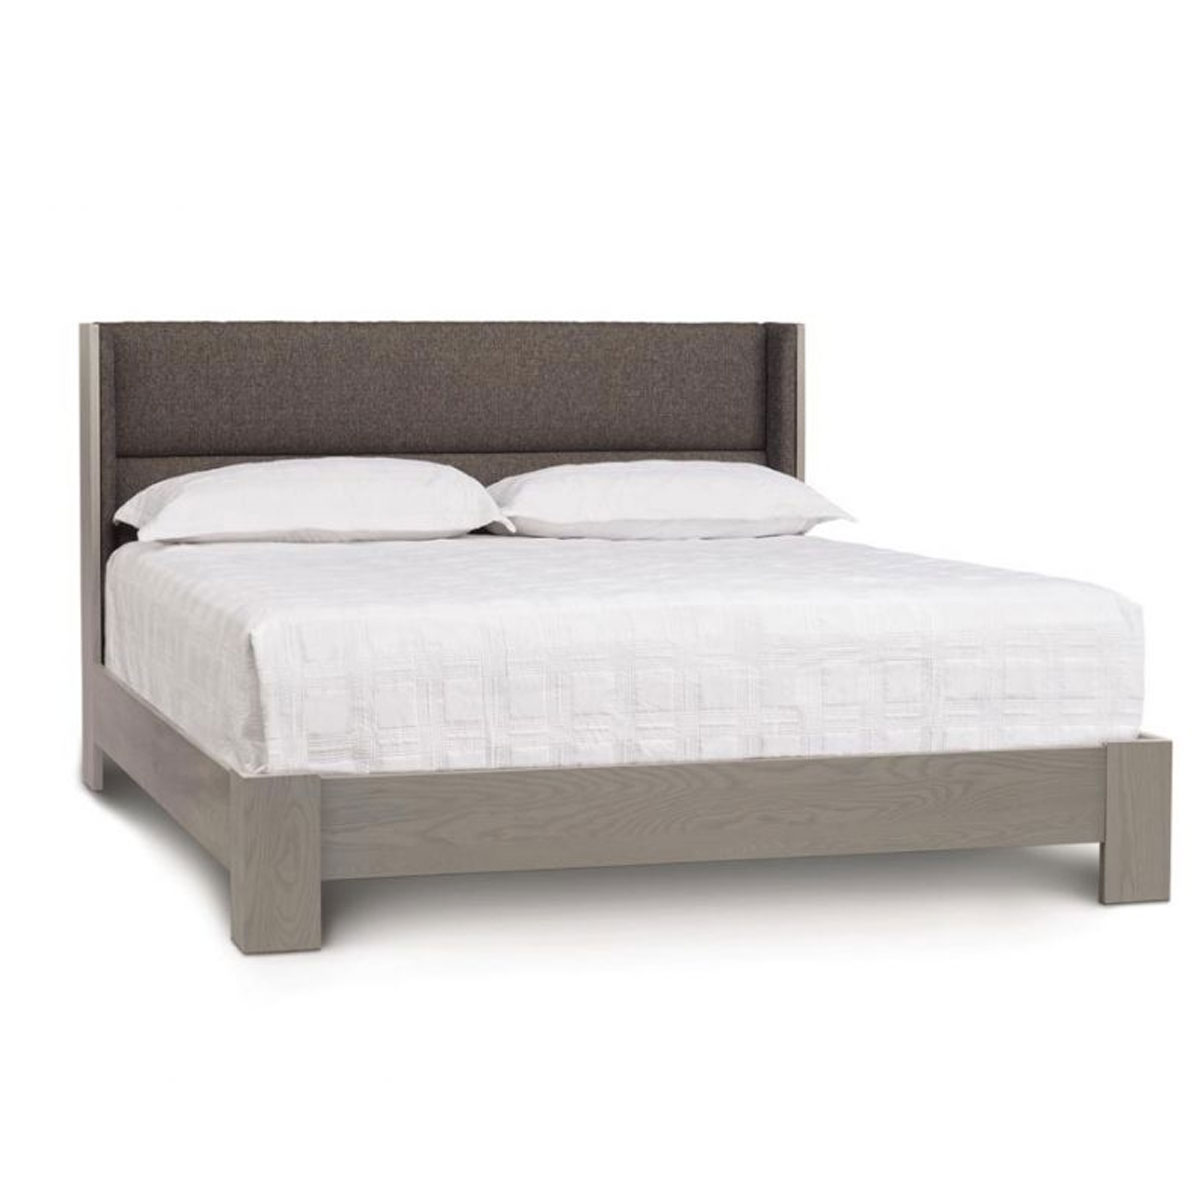 Copeland Sloane Bed with Legs for Mattress Only in Oak 